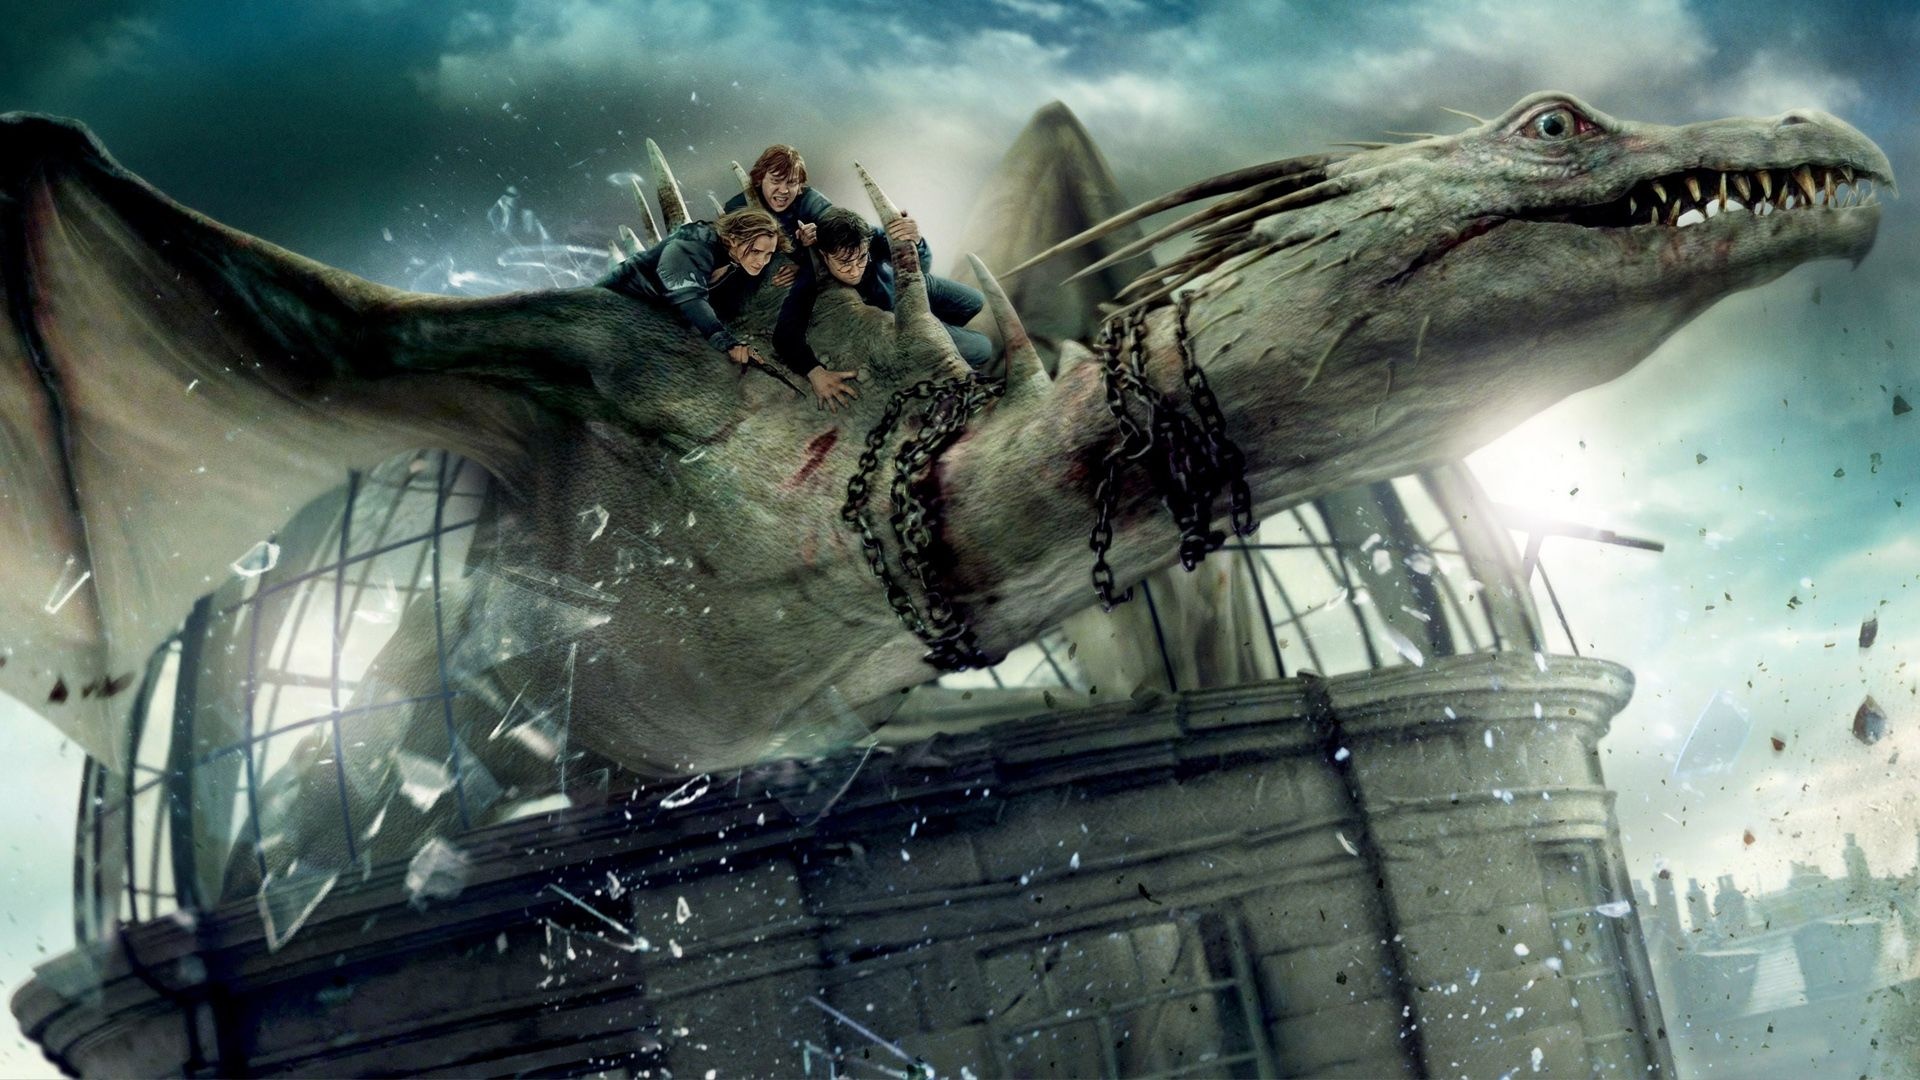 Harry Potter dragons, Artistically crafted, Magical creatures, 1920x1080 Full HD Desktop